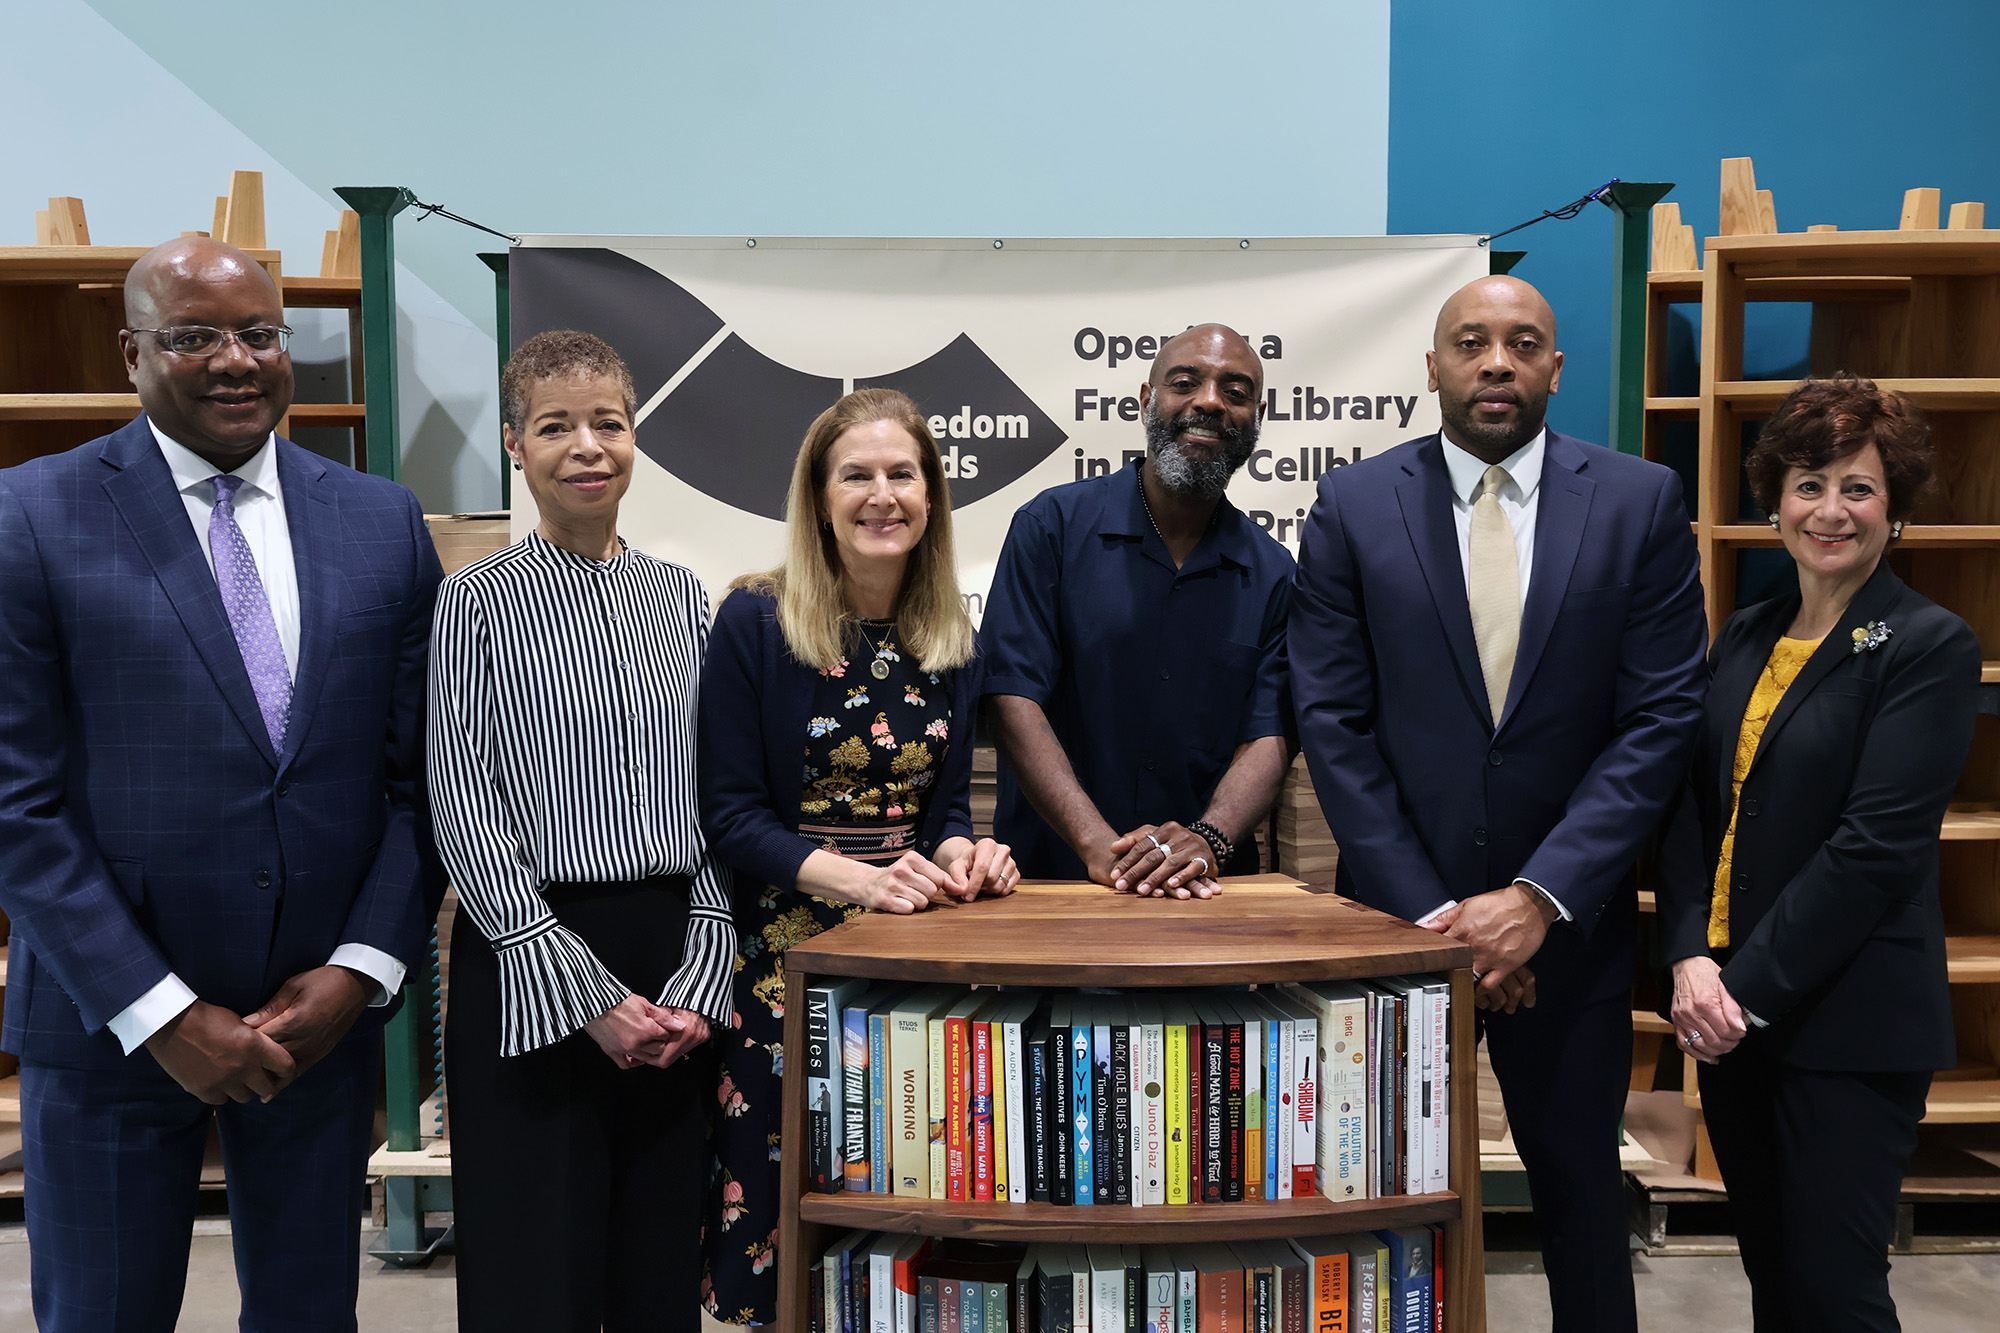 CHEFA and Freedom Reads hosted an official partnership launch event at Freedom Reads headquarters in Hamden, CT. From left to right: CHEFA Grant Committee Chair Lawrence Davis, CHEFA Executive Director Jeanette W. Weldon, Connecticut Lieutenant Governor Susan Bysiewicz, Freedom Reads Founder & CEO Reginald Dwayne Betts, Chief Diversity and Inclusion Officer for the Connecticut Office of Workforce Strategy Anthony Barrett, and CHEFA Manager of Grant Programs and Philanthropic Outreach Betty Sugerman Weintraub.